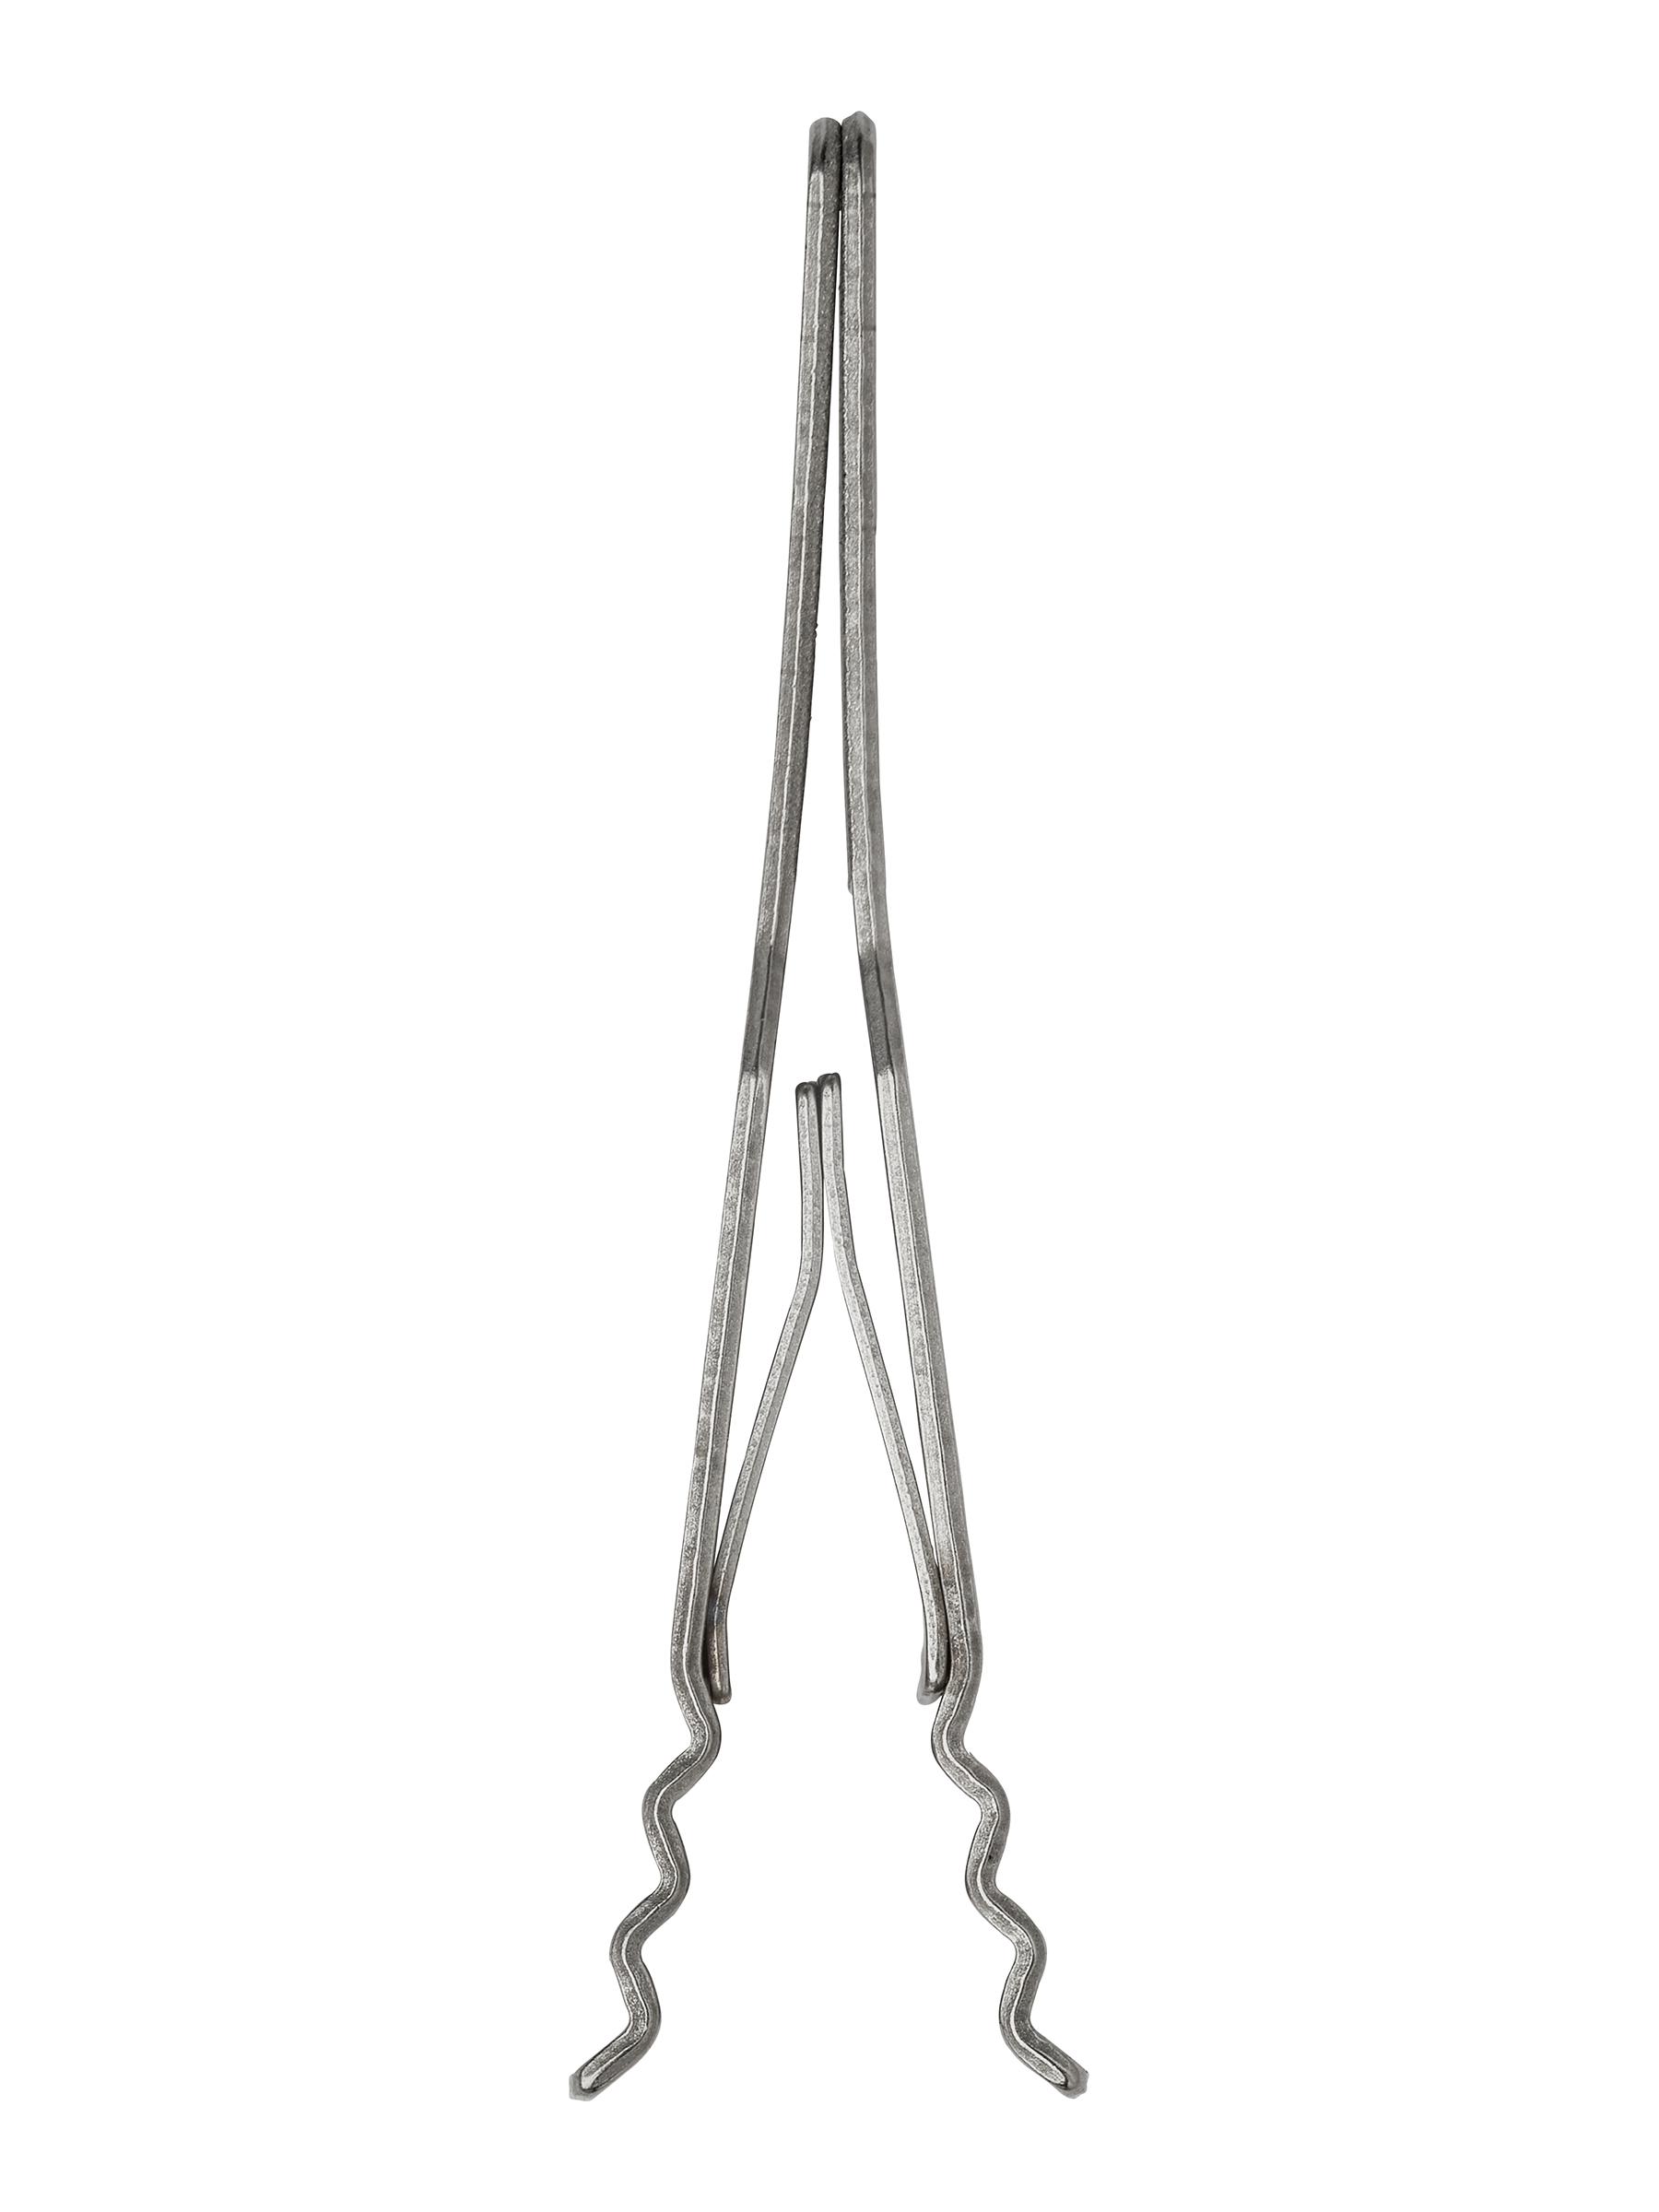 S&T Vascular Clamps